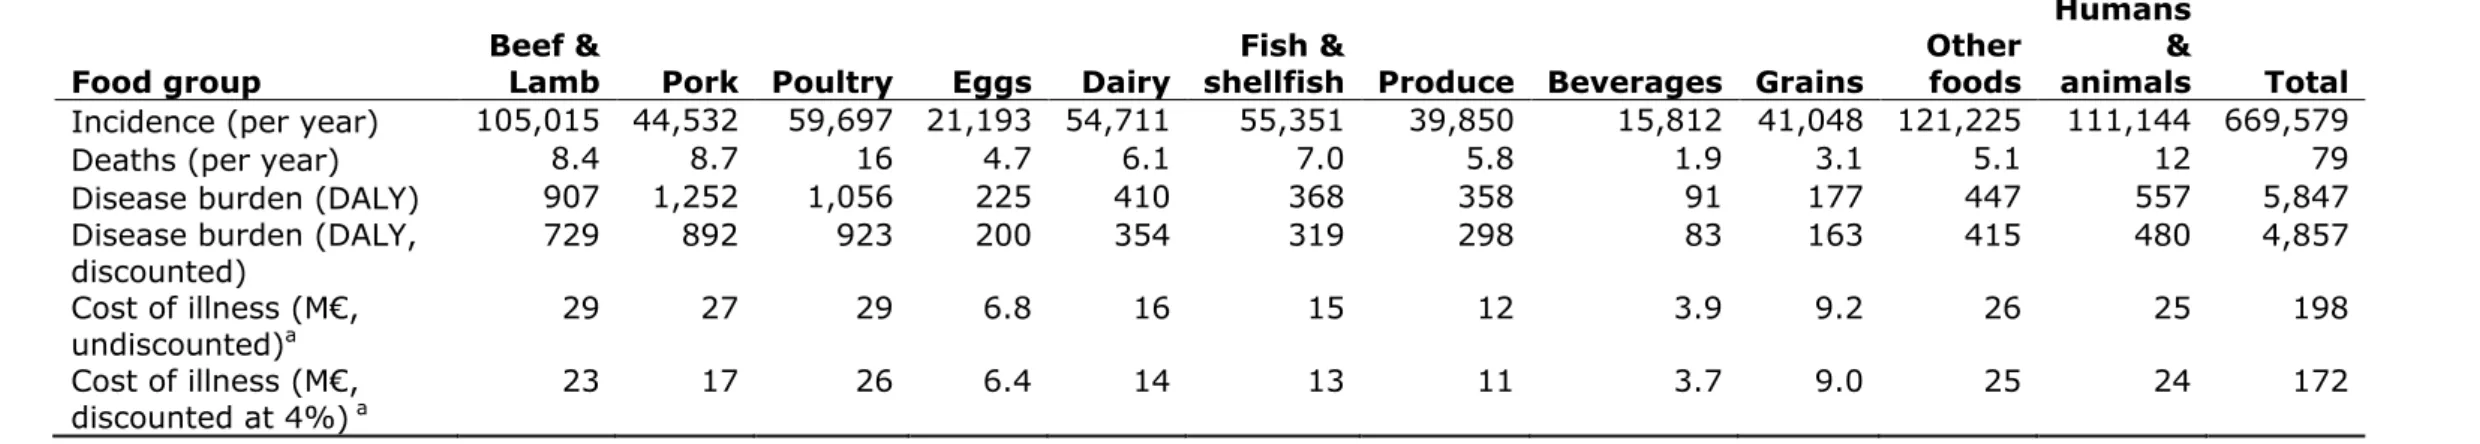 Table 11. Attribution of the incidence, fatalities, disease burden and Cost-of-Illness of foodborne disease *  to food groups in the  Netherlands, 2013 